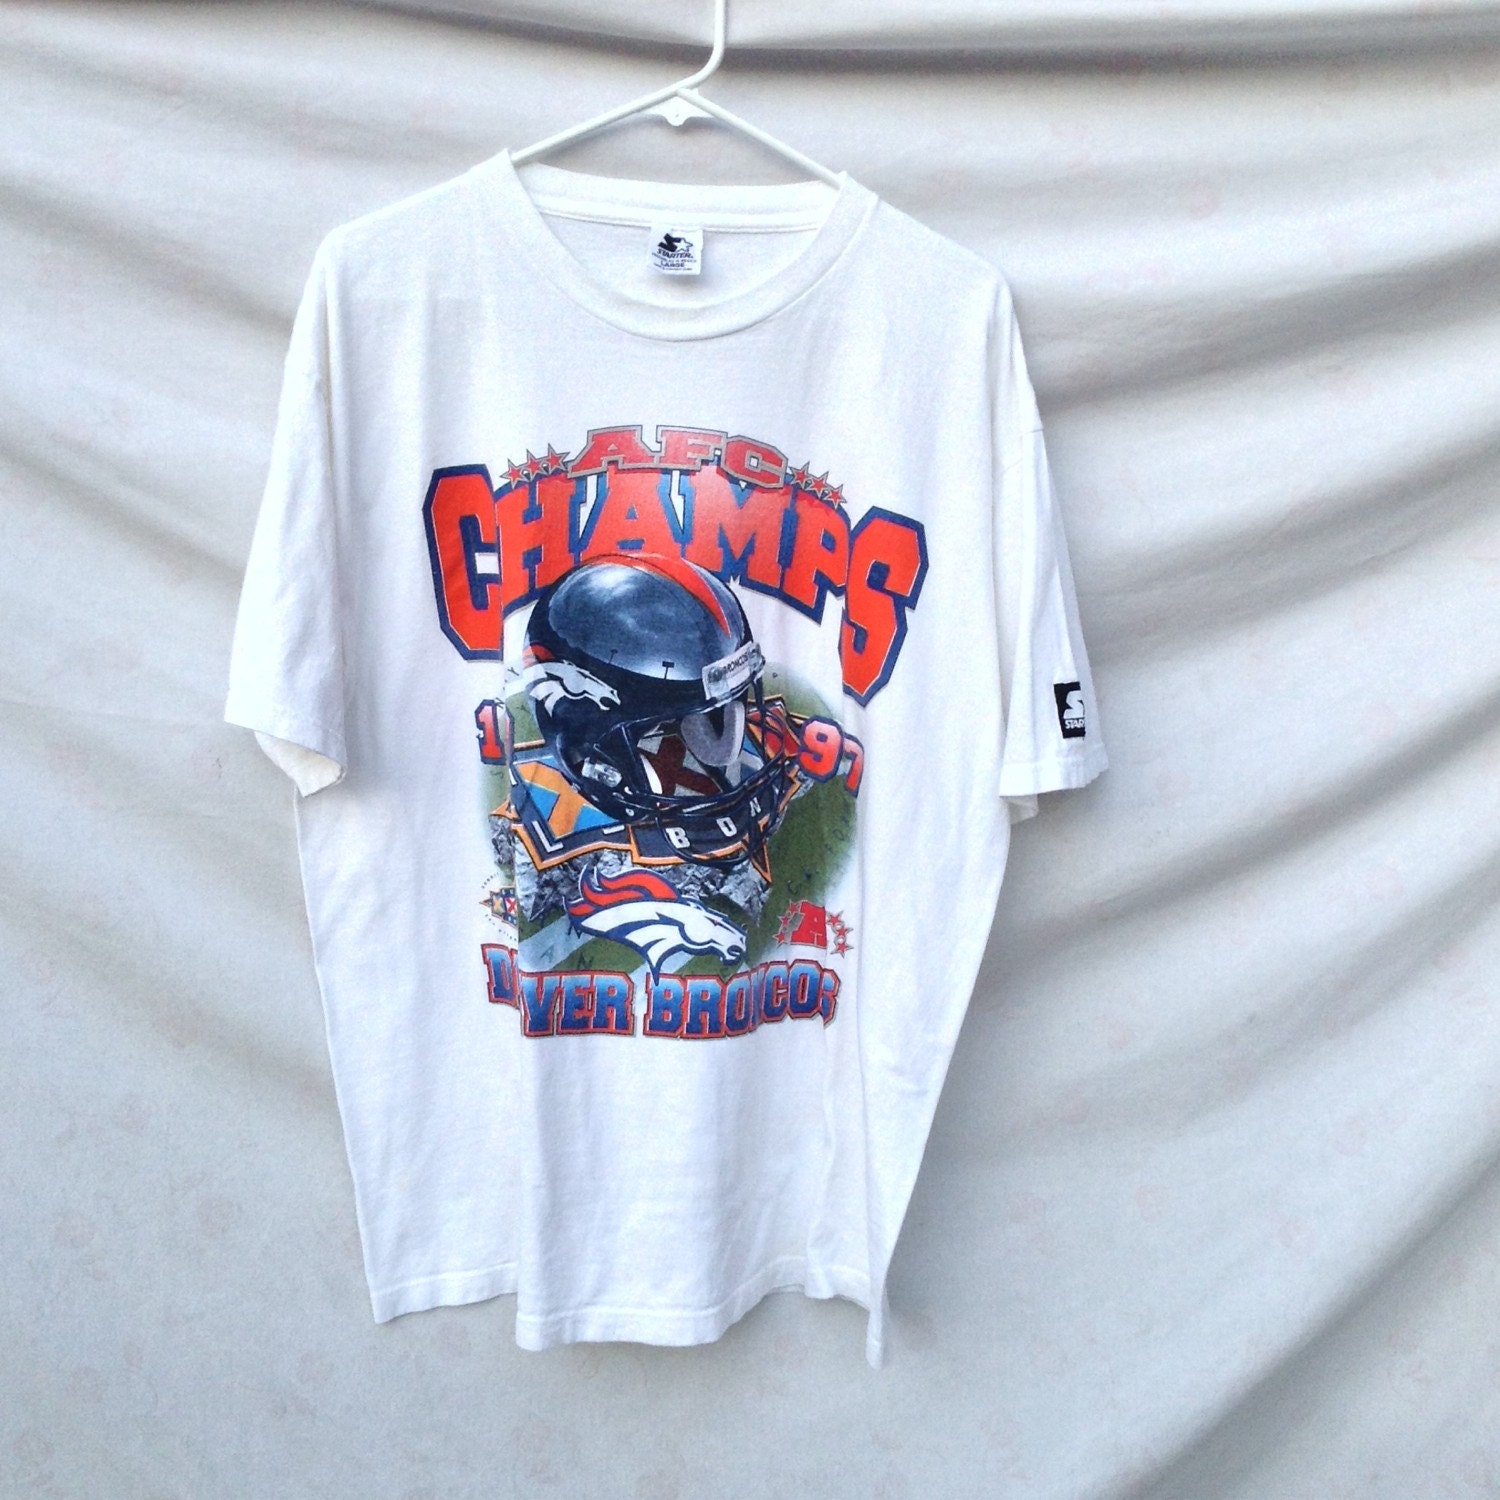 DOPE Vintage T-Shirt // Size Large by TheDandyRapper on Etsy